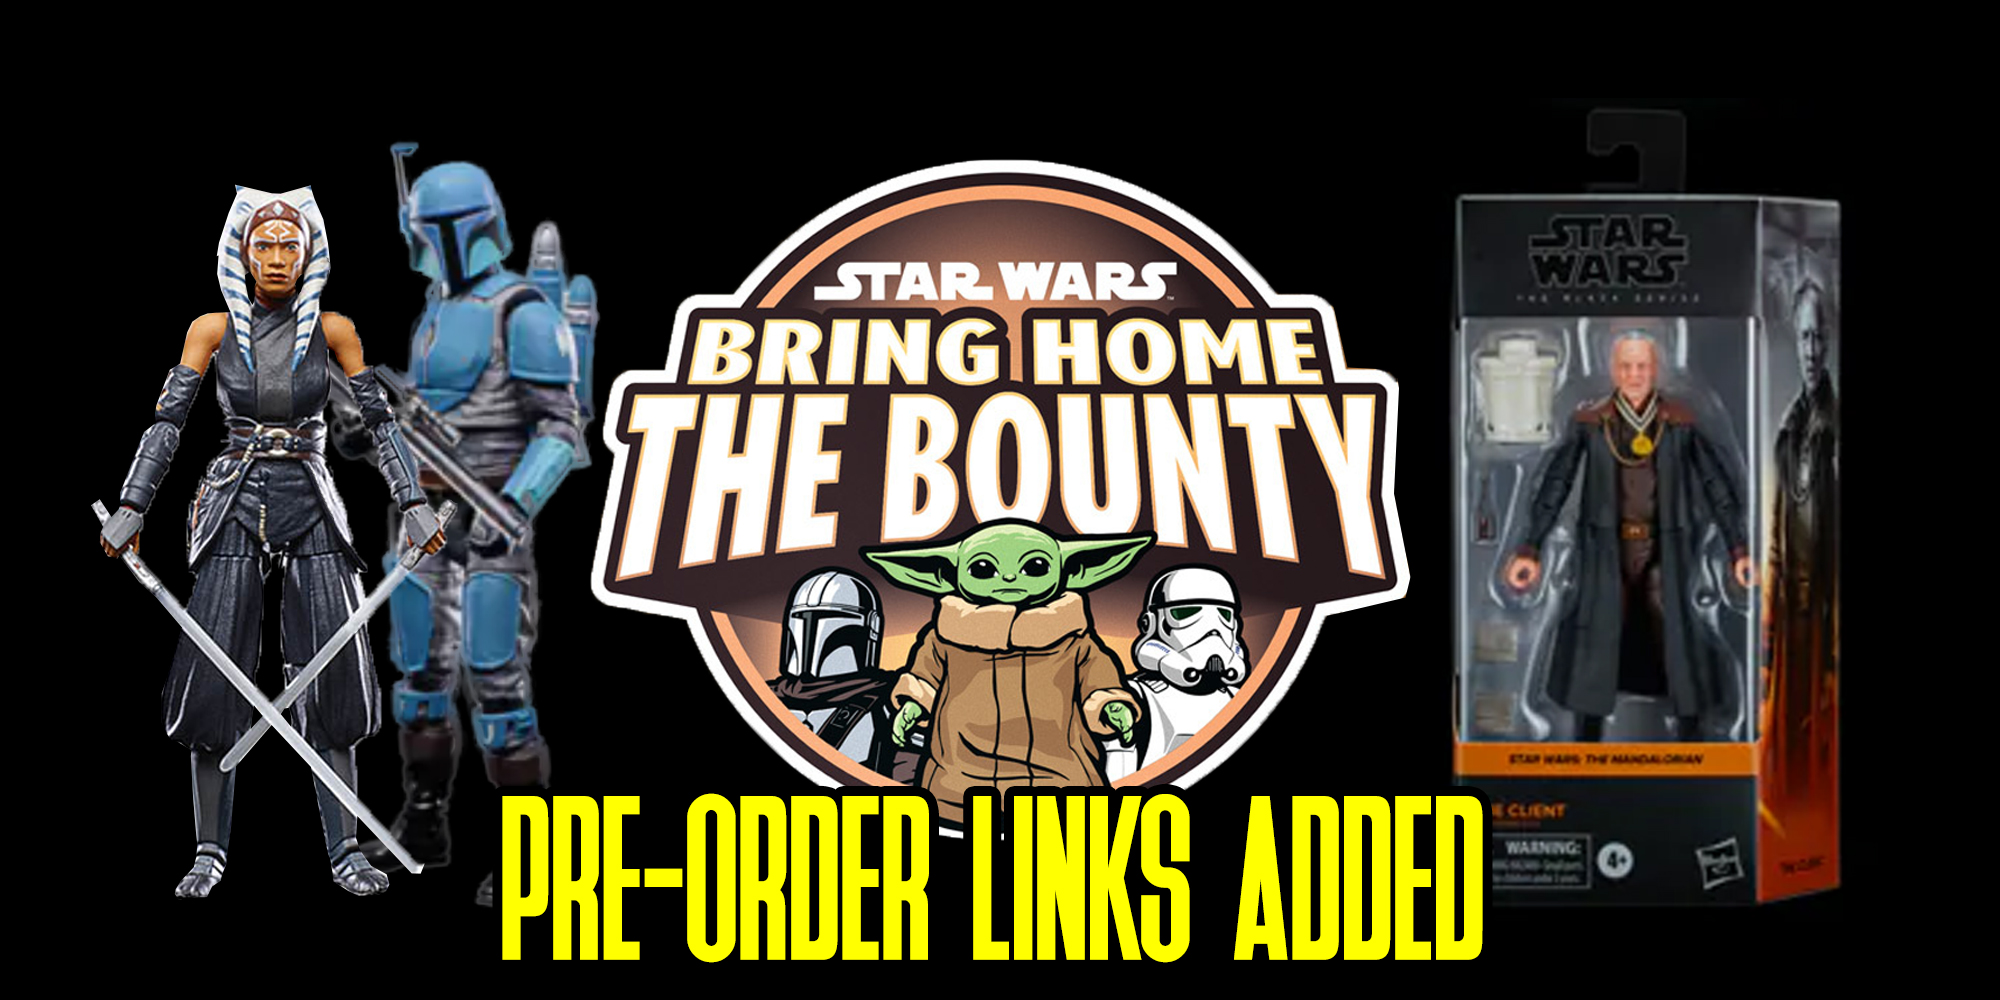 Bring Home The Bounty Campaign Reveals New Figures